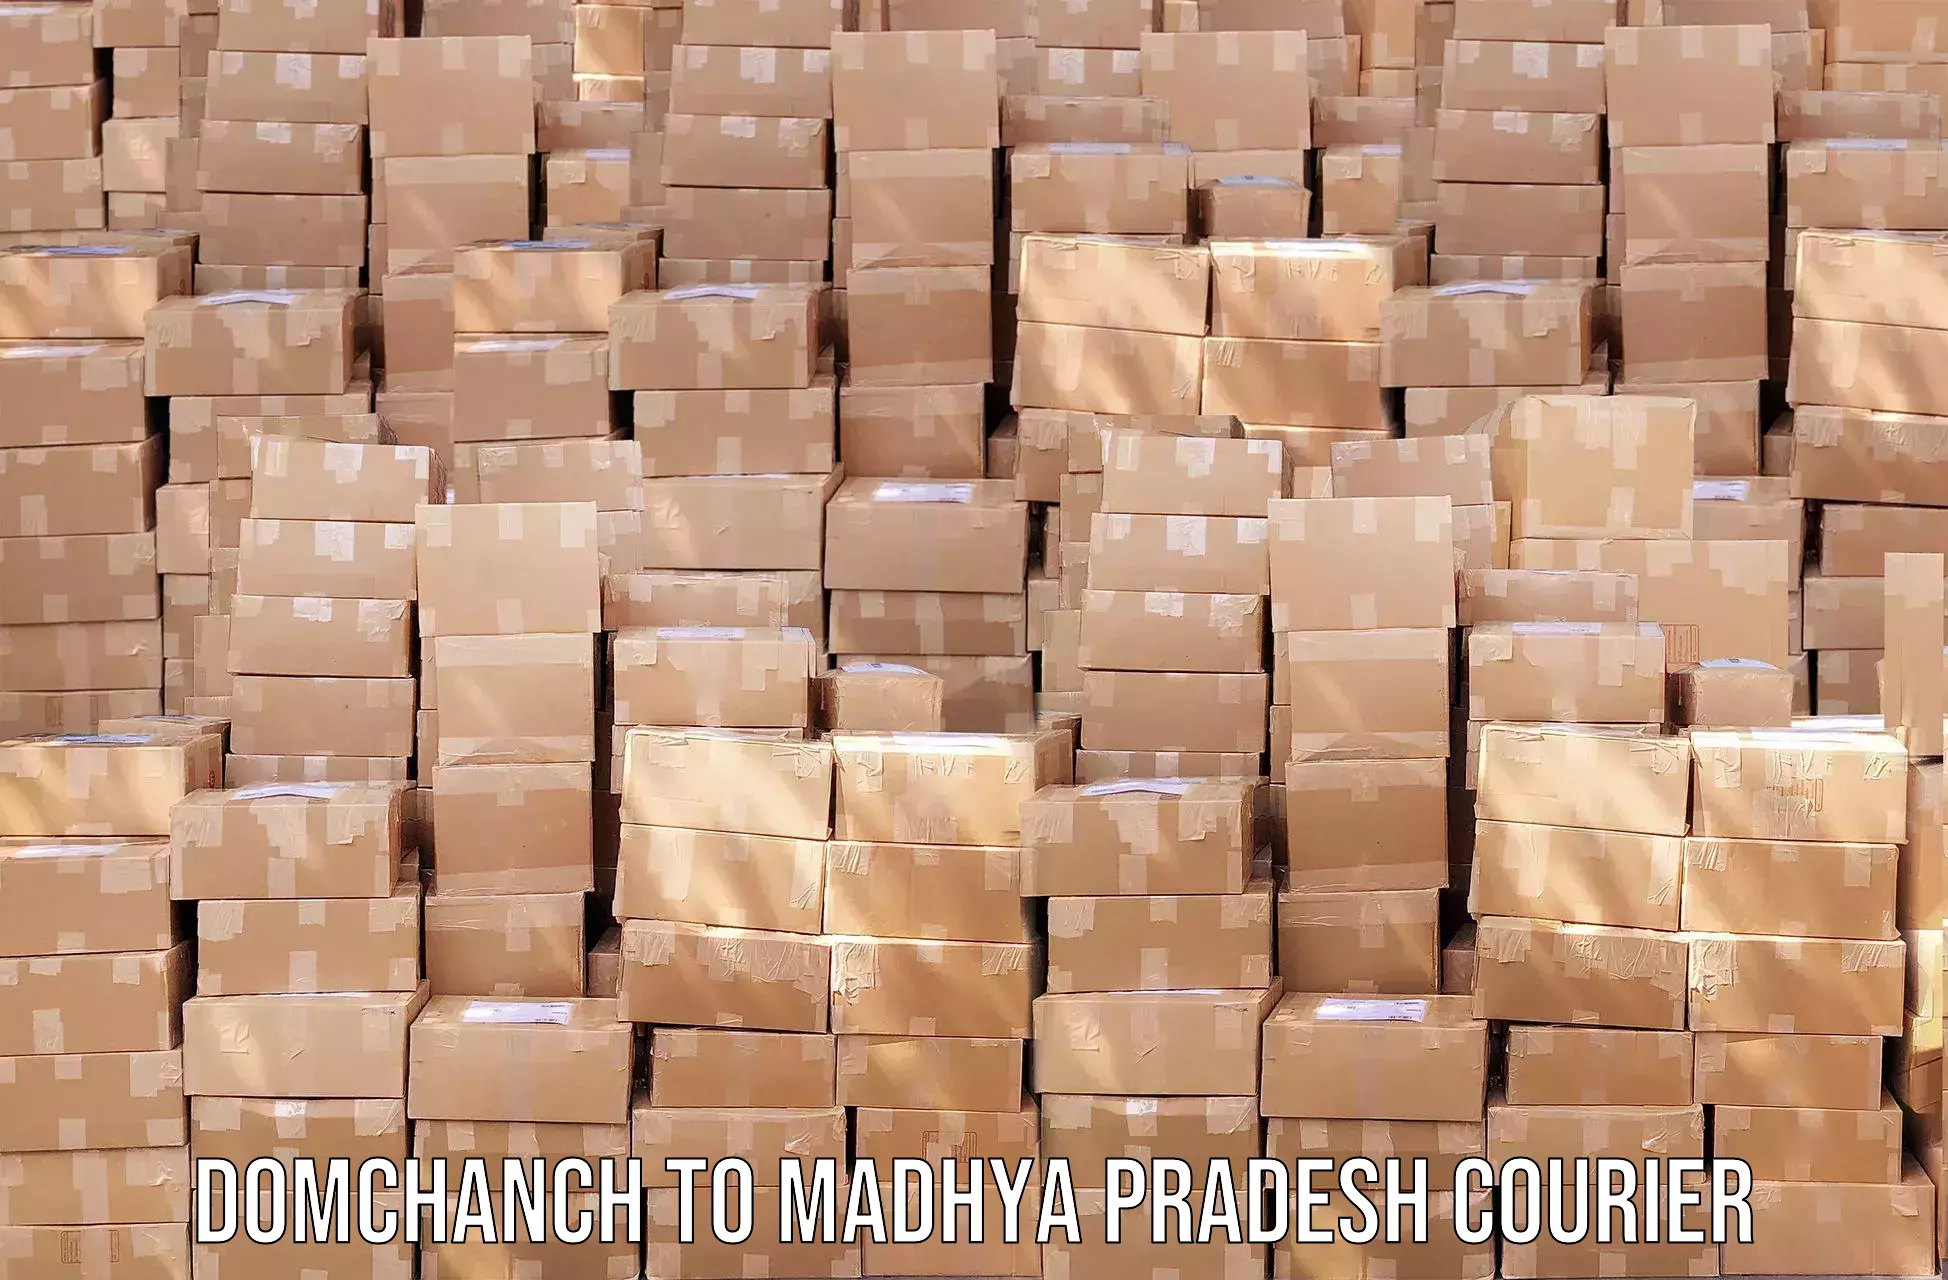 Quality courier services Domchanch to Madhya Pradesh